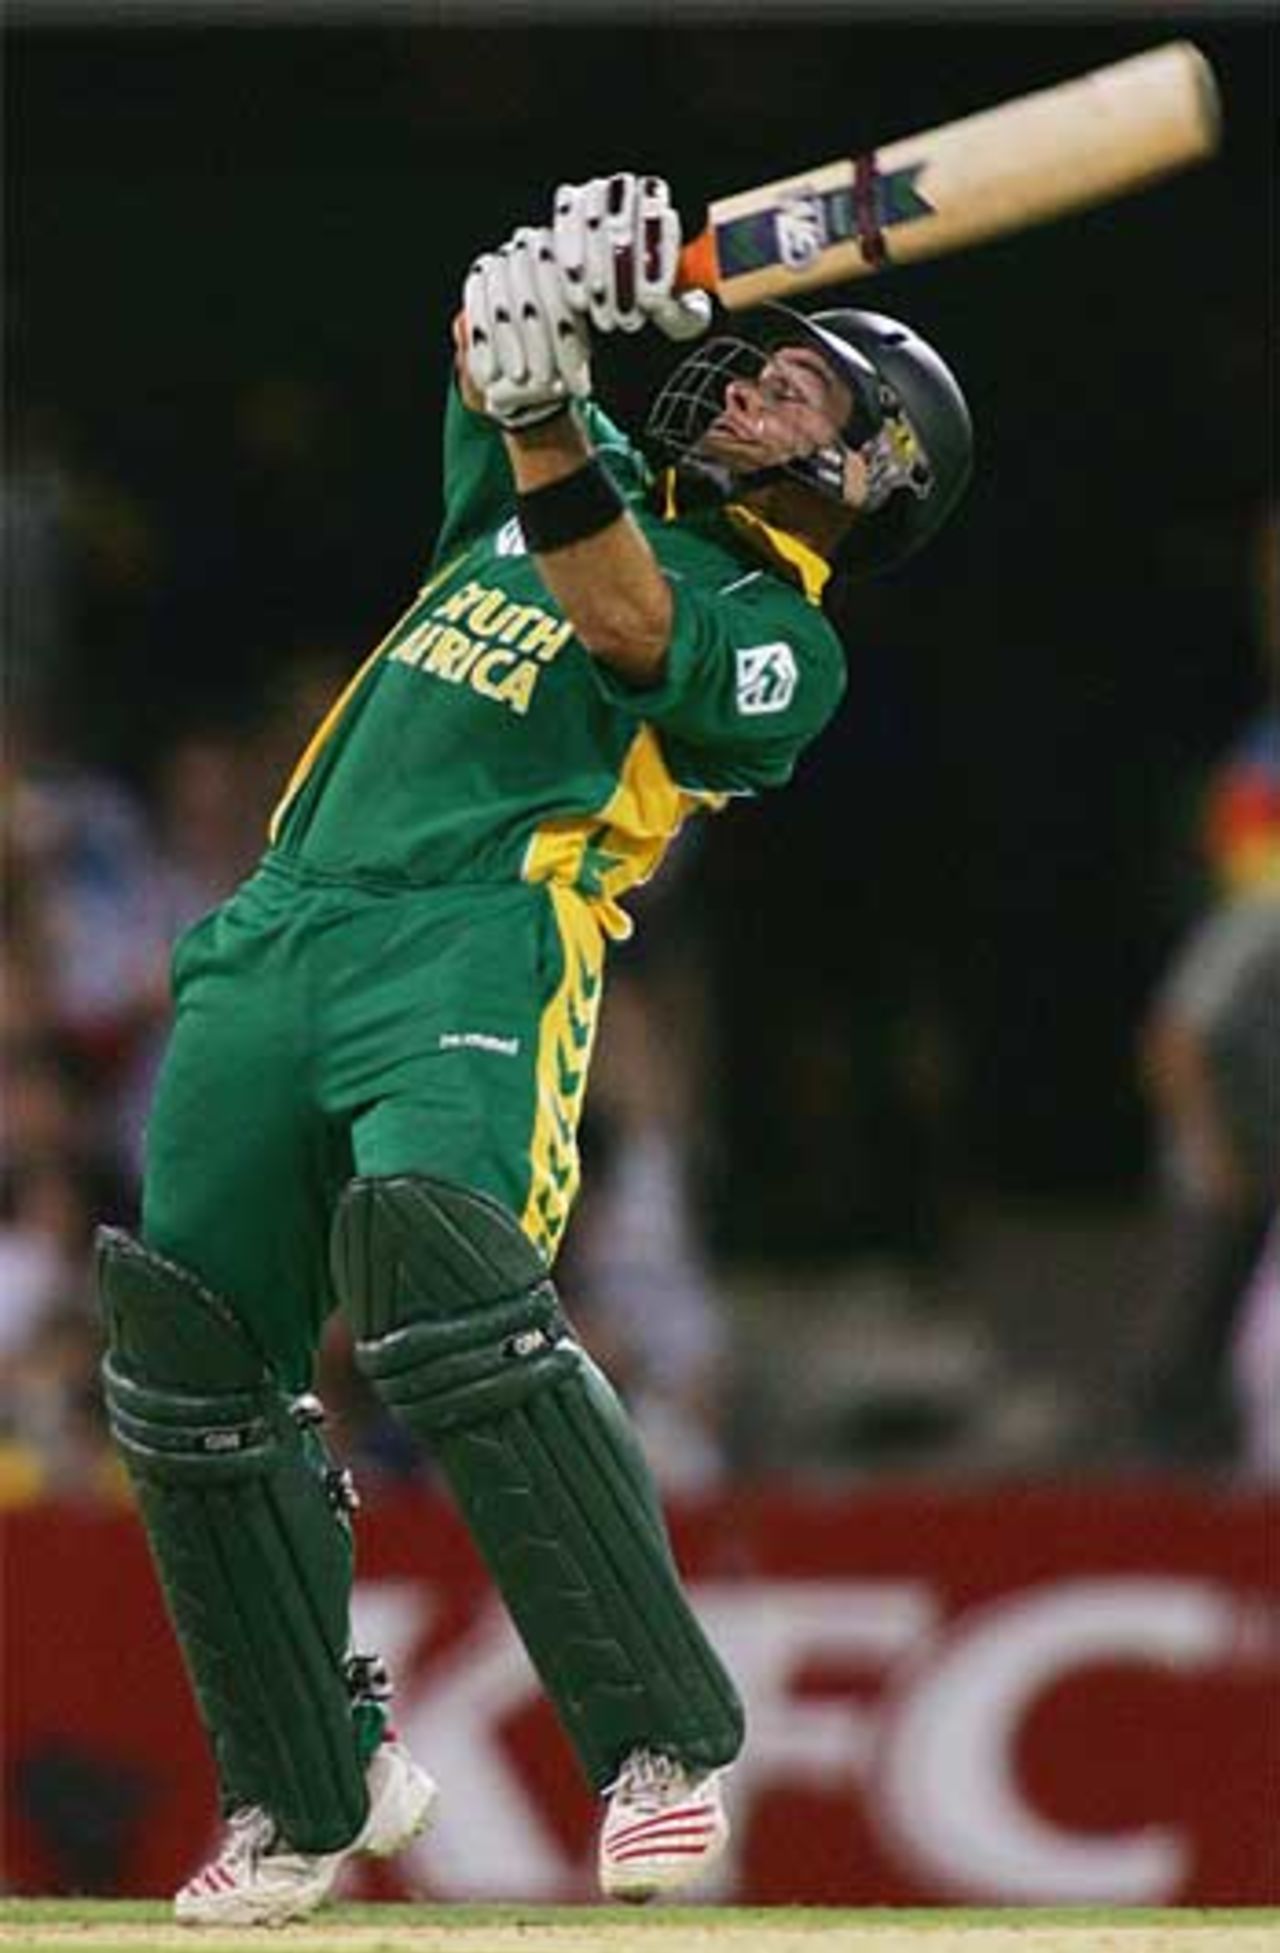 Mark Boucher strikes out in vain - South Africa lost easily, Australia v South Africa, Brisbane, January 9, 2006